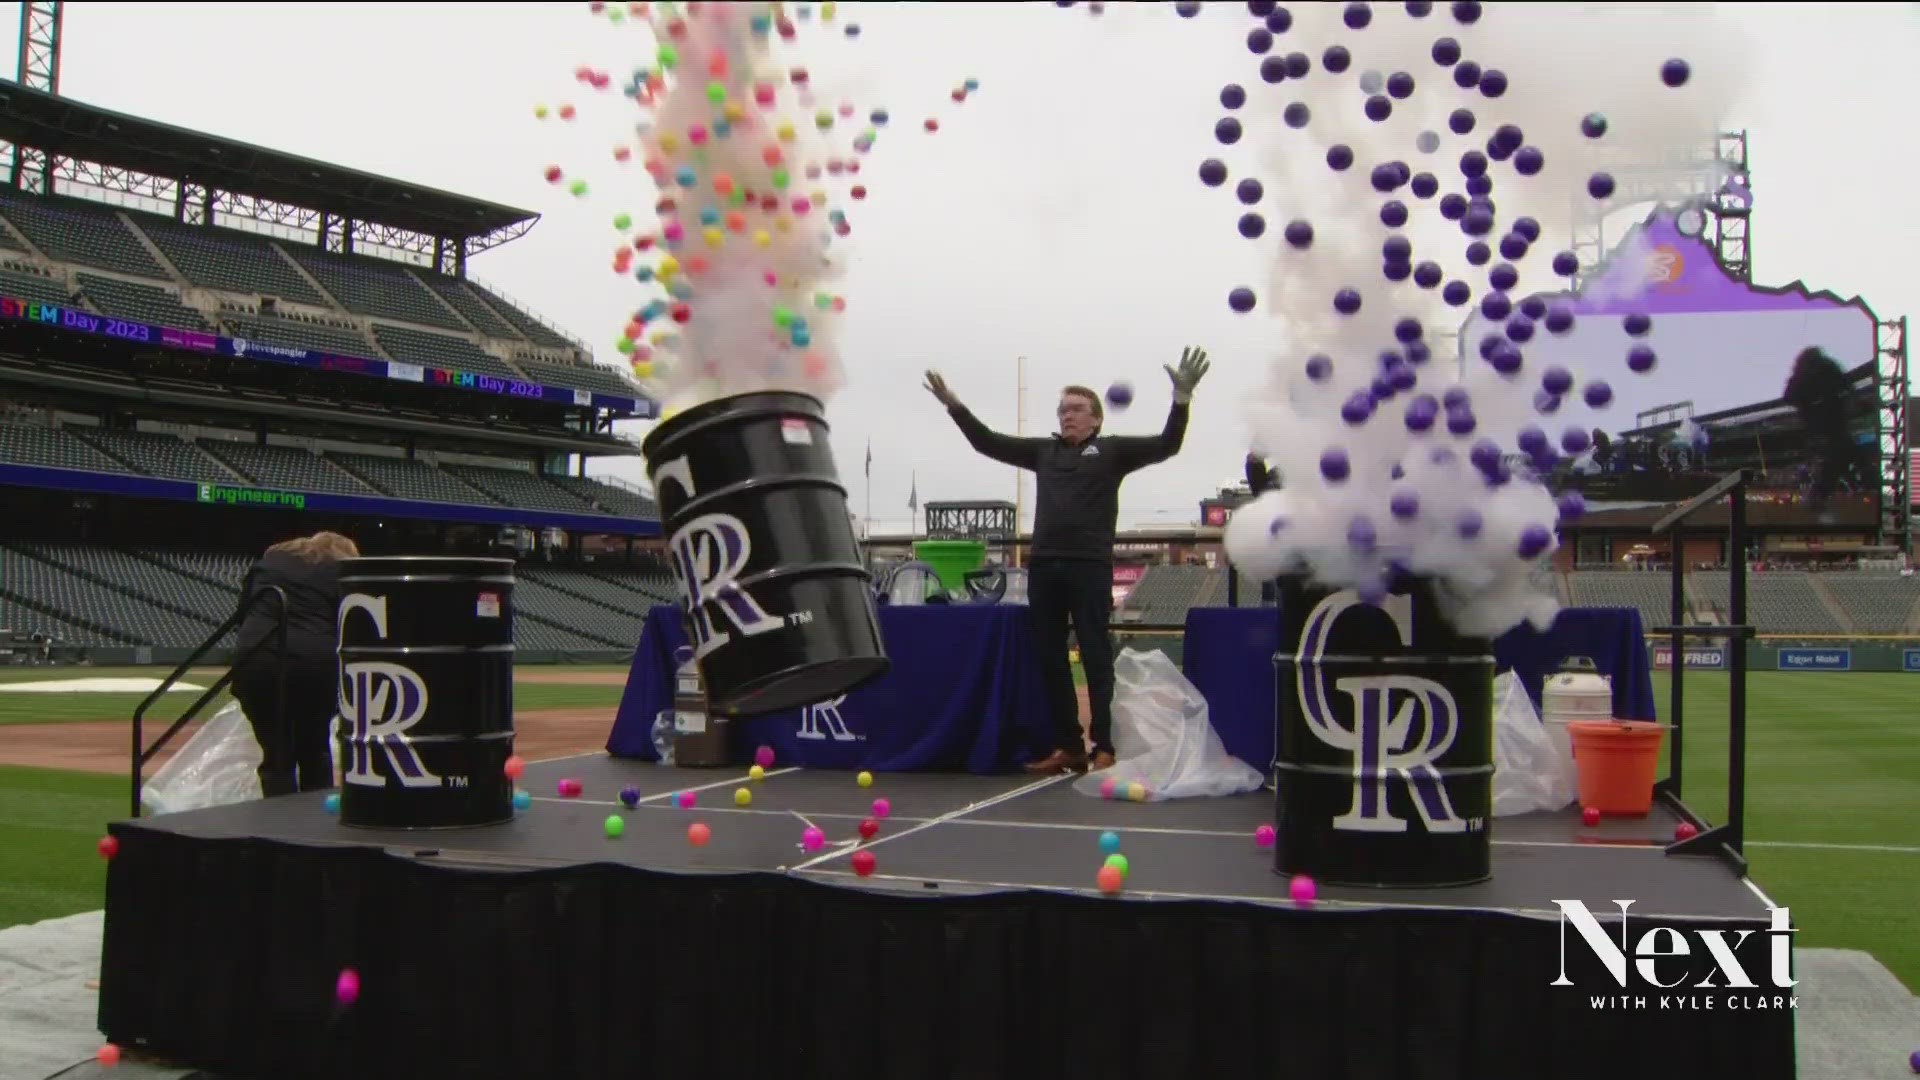 Watching Steve Spangler blow things up beats Rockies games for science-minded kids.